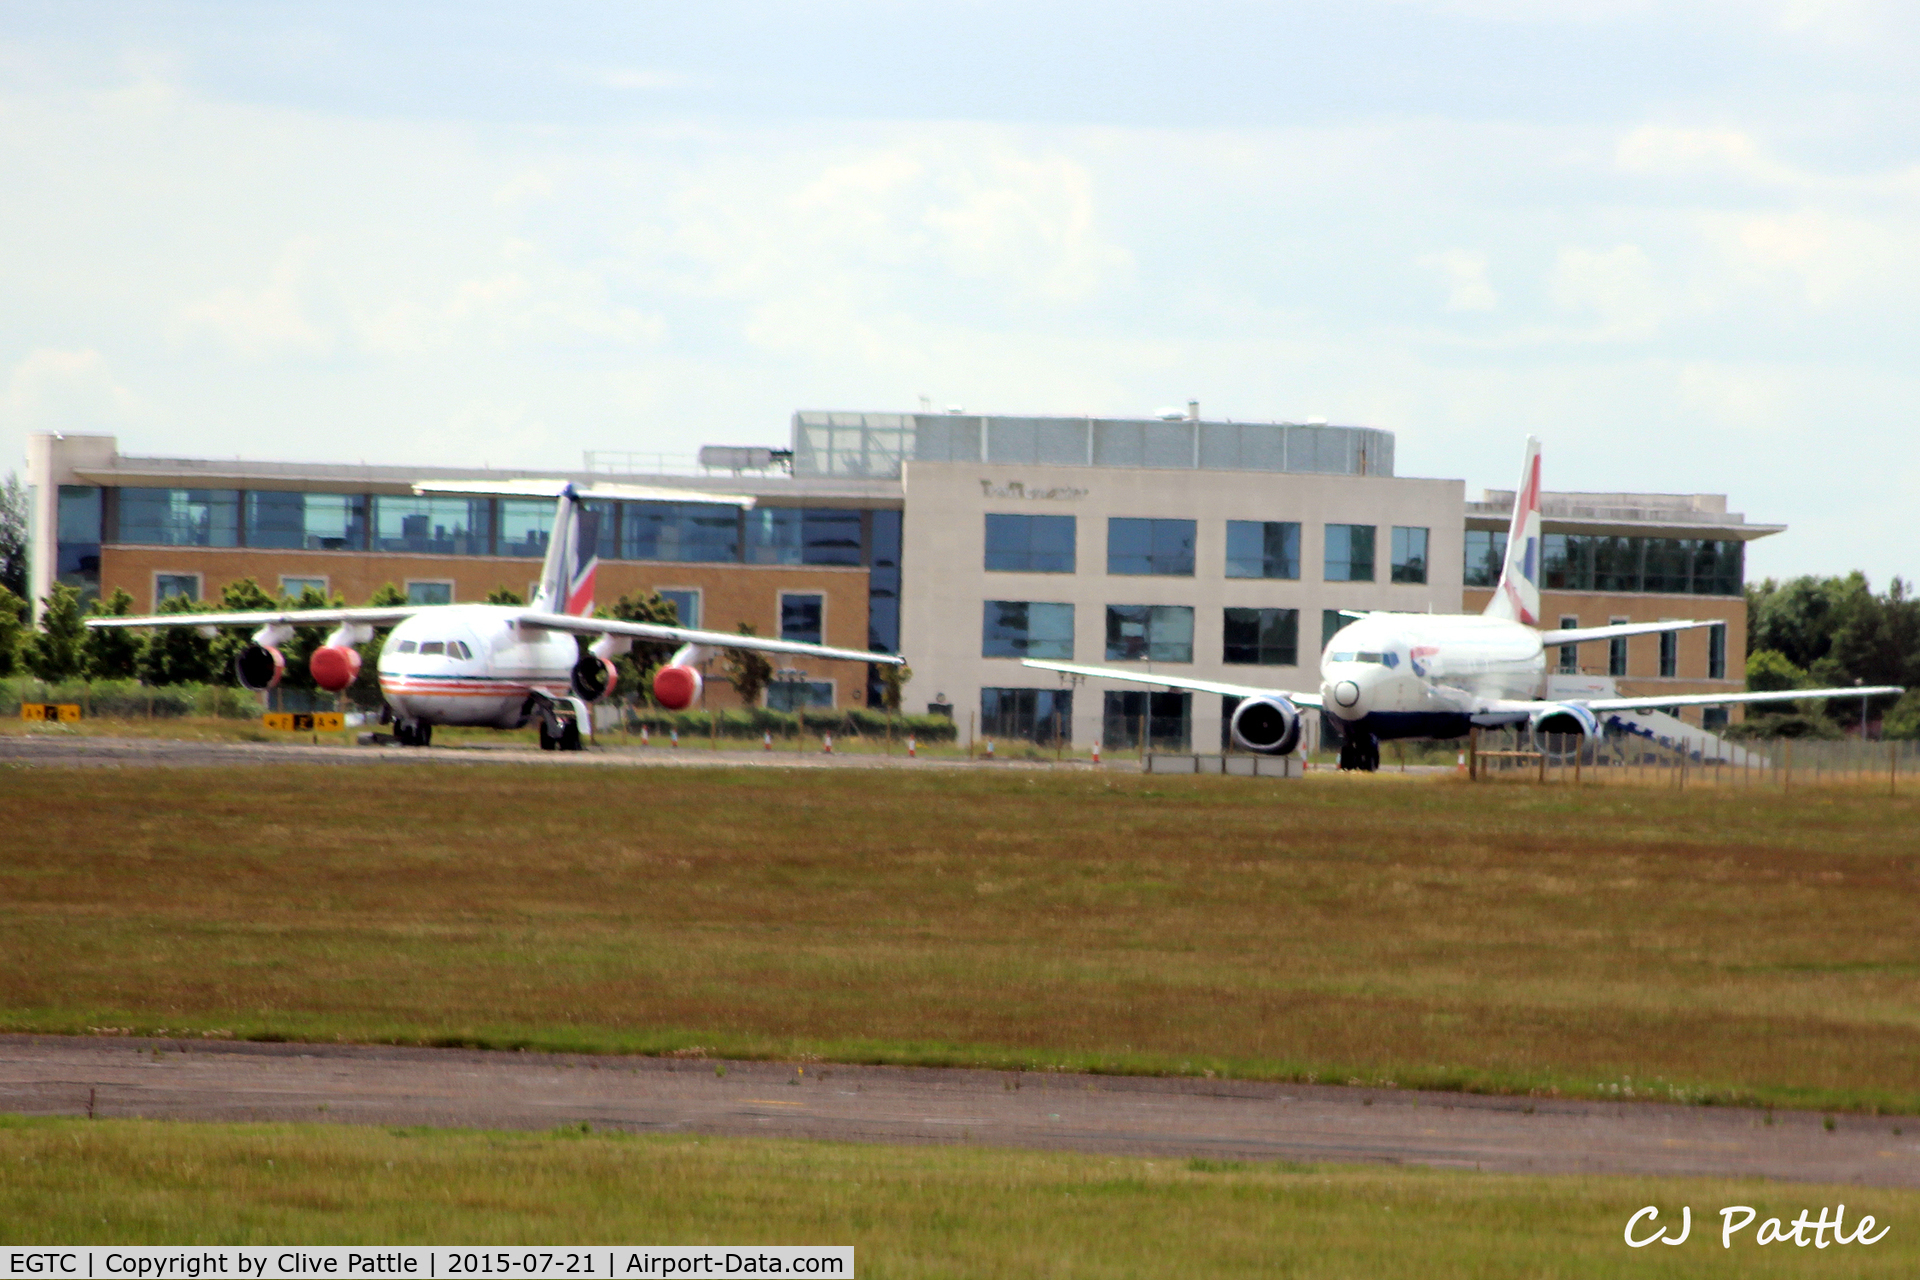 Cranfield Airport, Cranfield, England United Kingdom (EGTC) - Stored instructional airframes at Cranfield EGTC, Bedfordshire, UK viewed from the runway